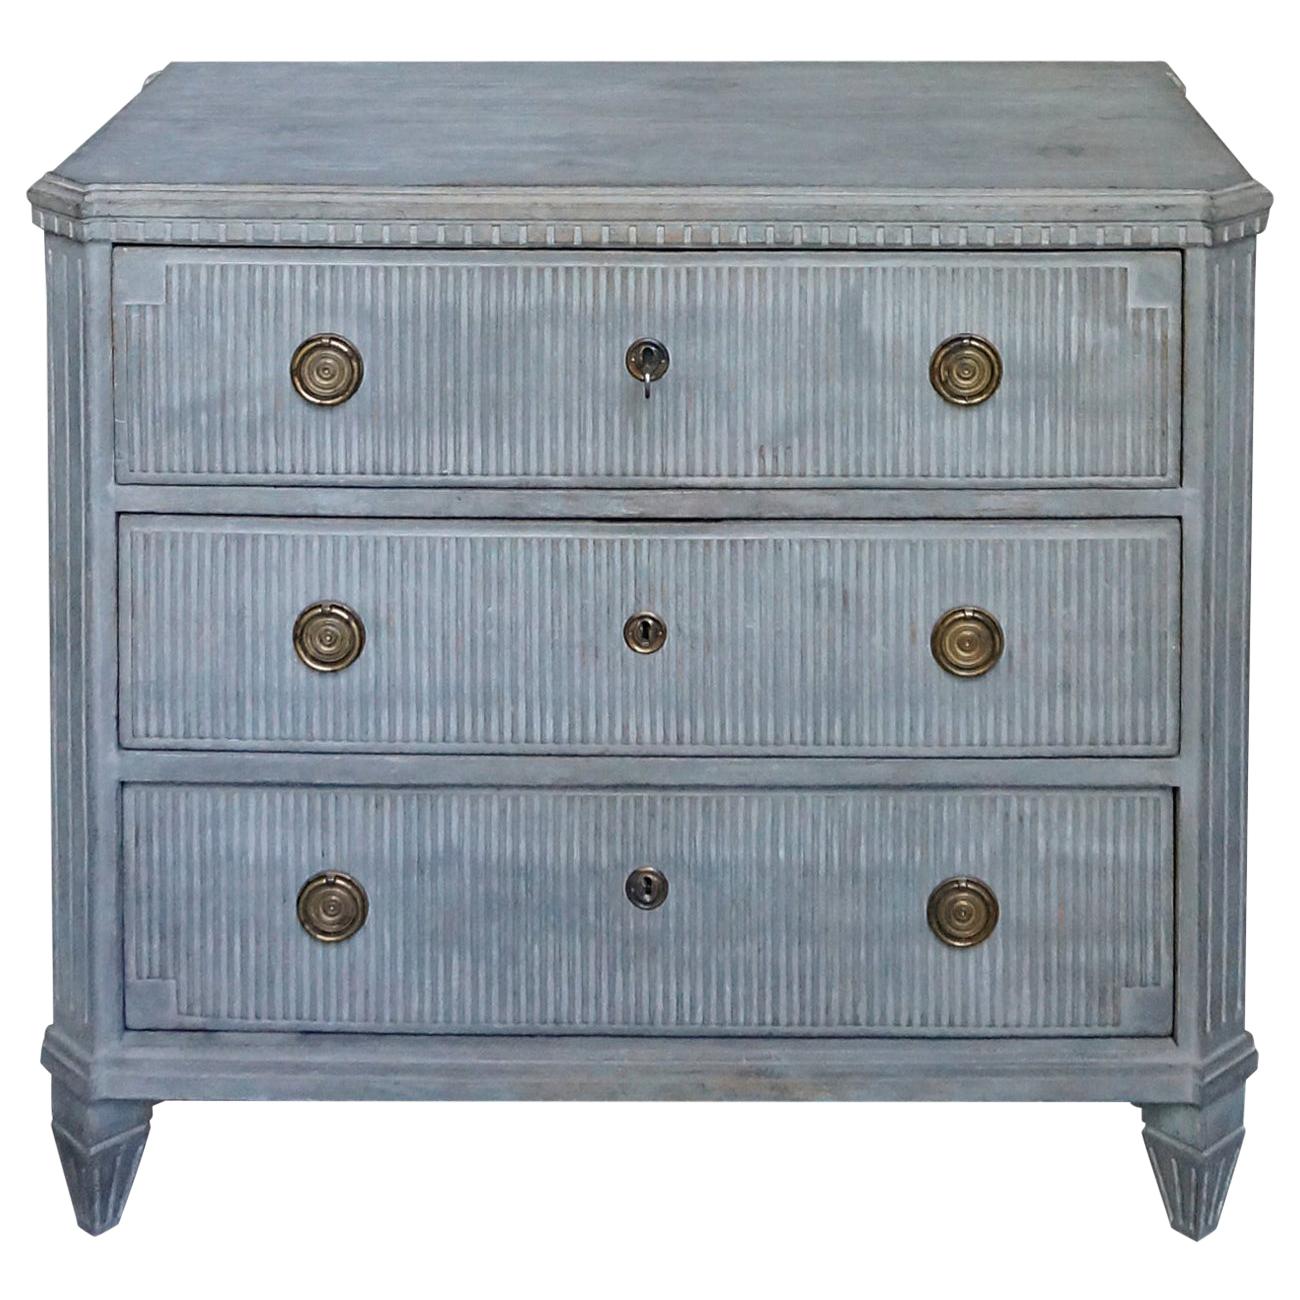 Reeded Chest of Drawers in the Neoclassical Style